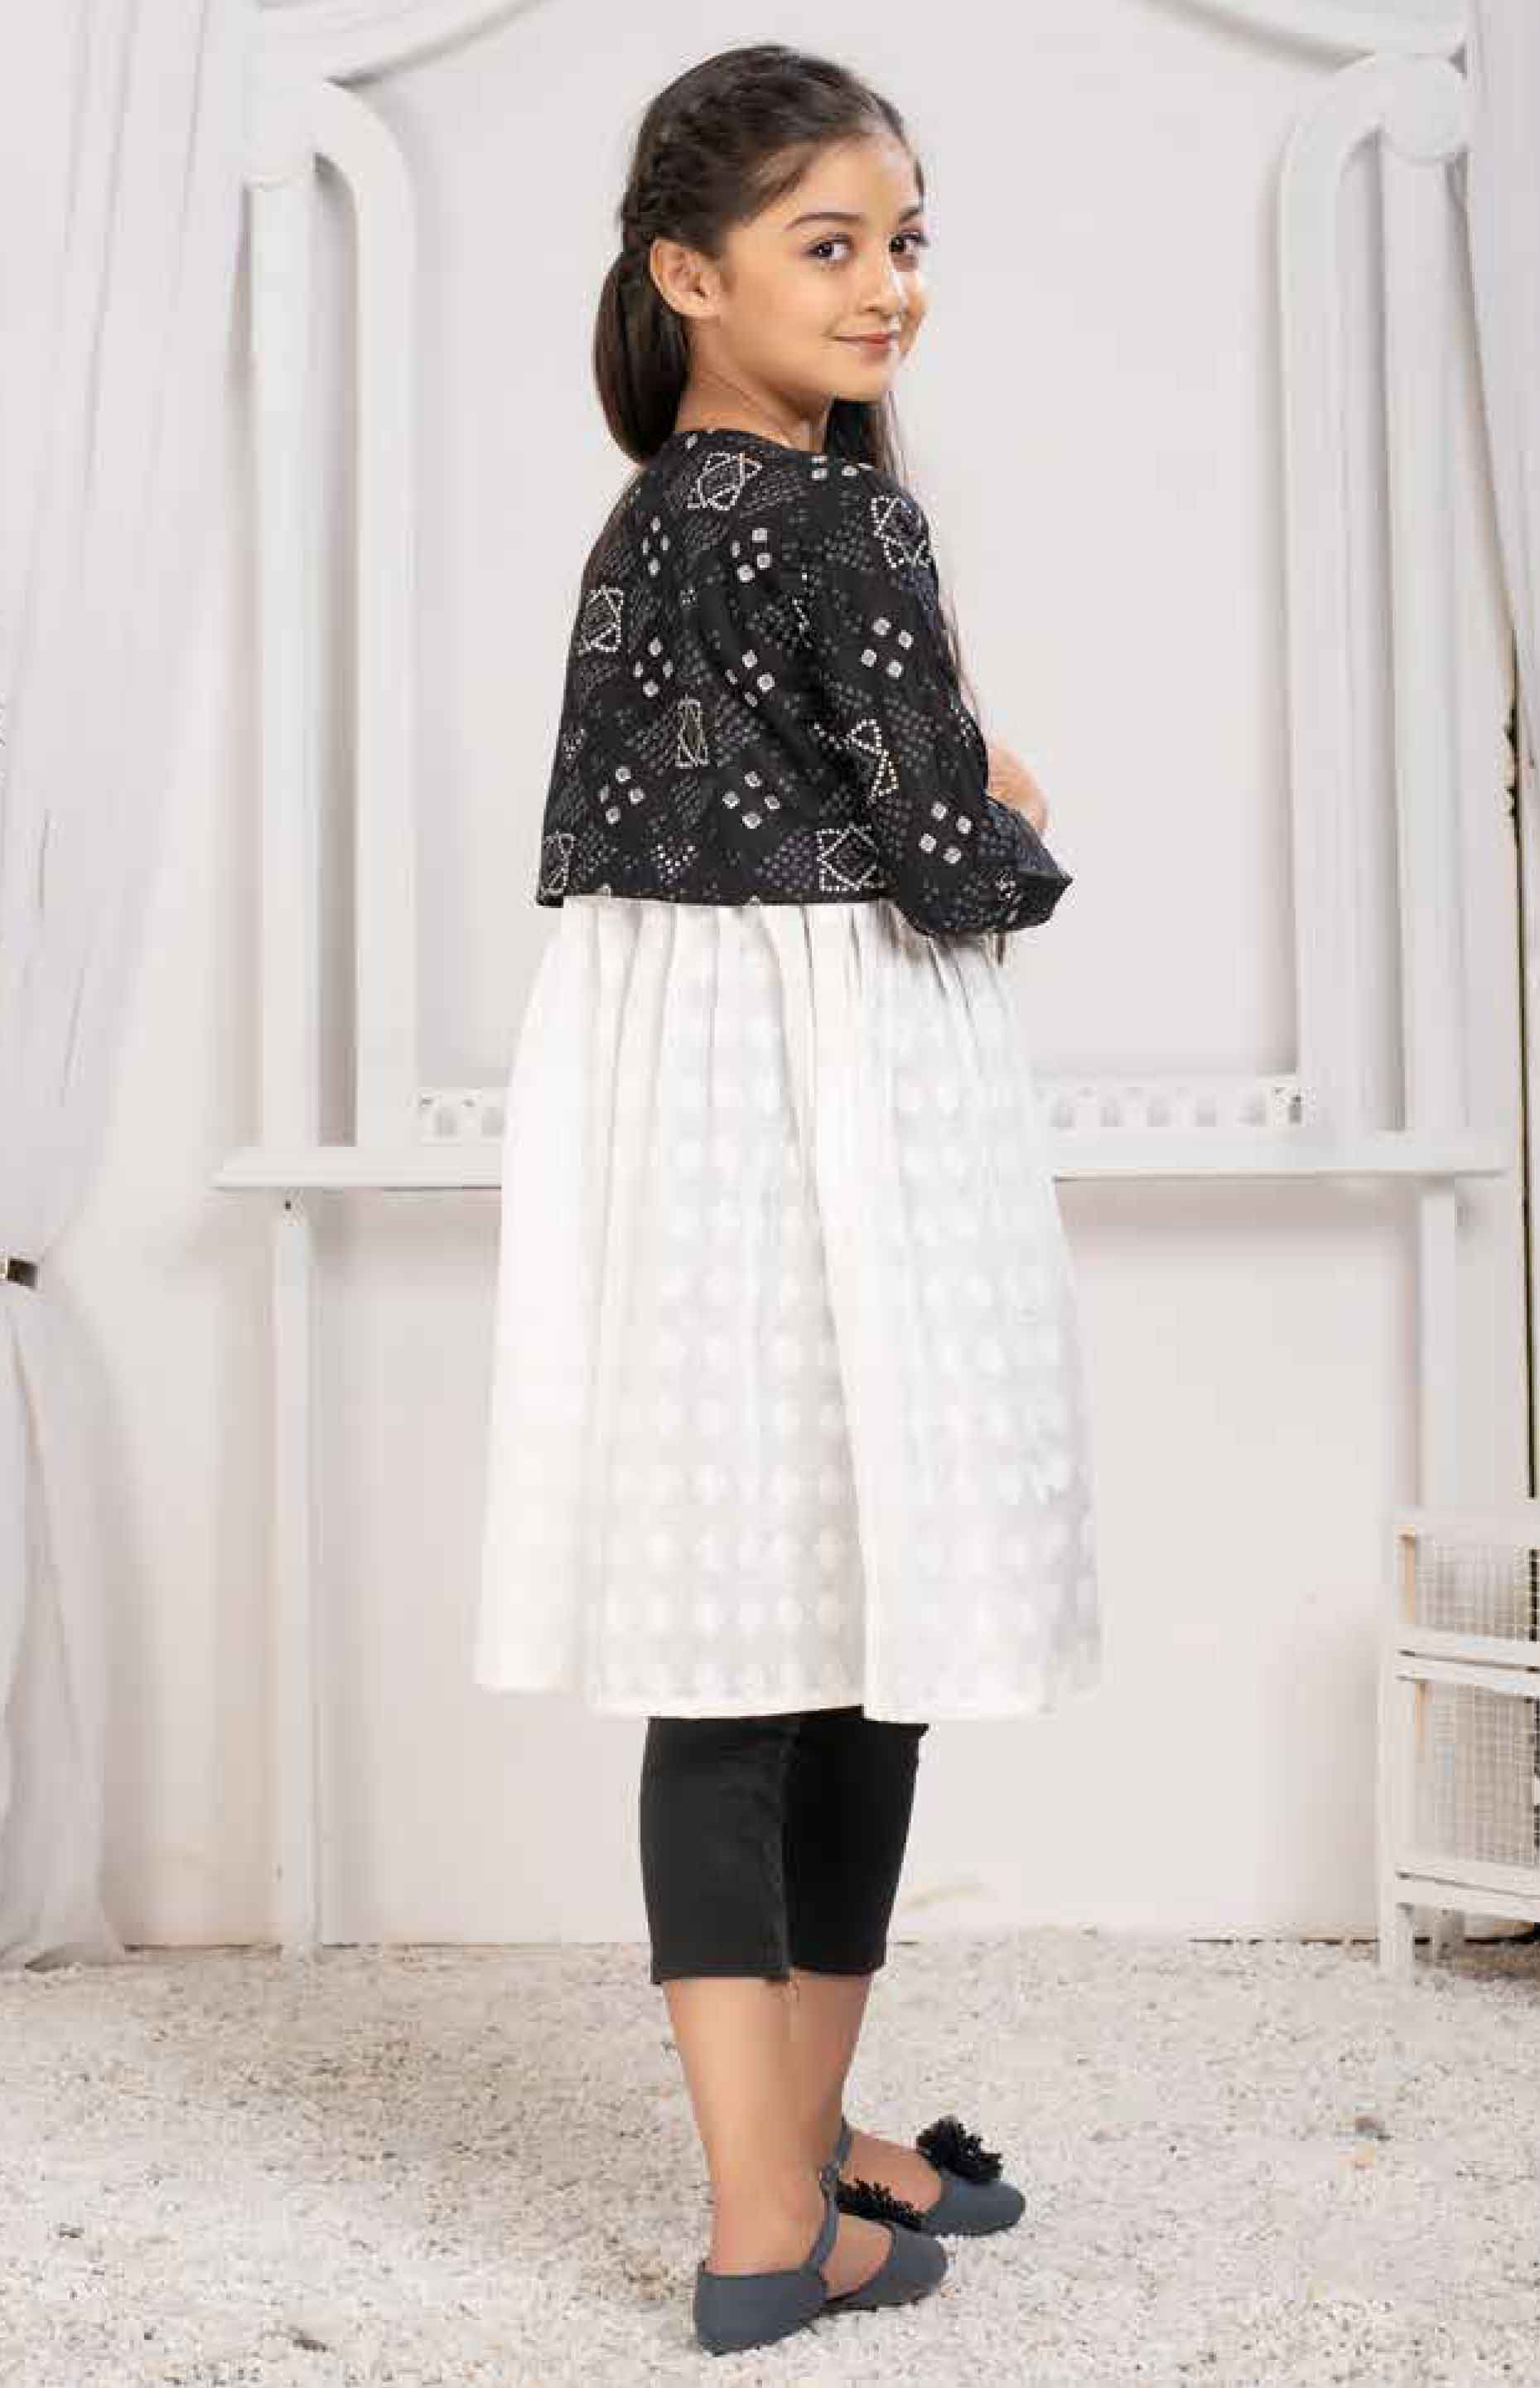 Sunaina Rao - Long floral jacket paired with black crop... | Facebook